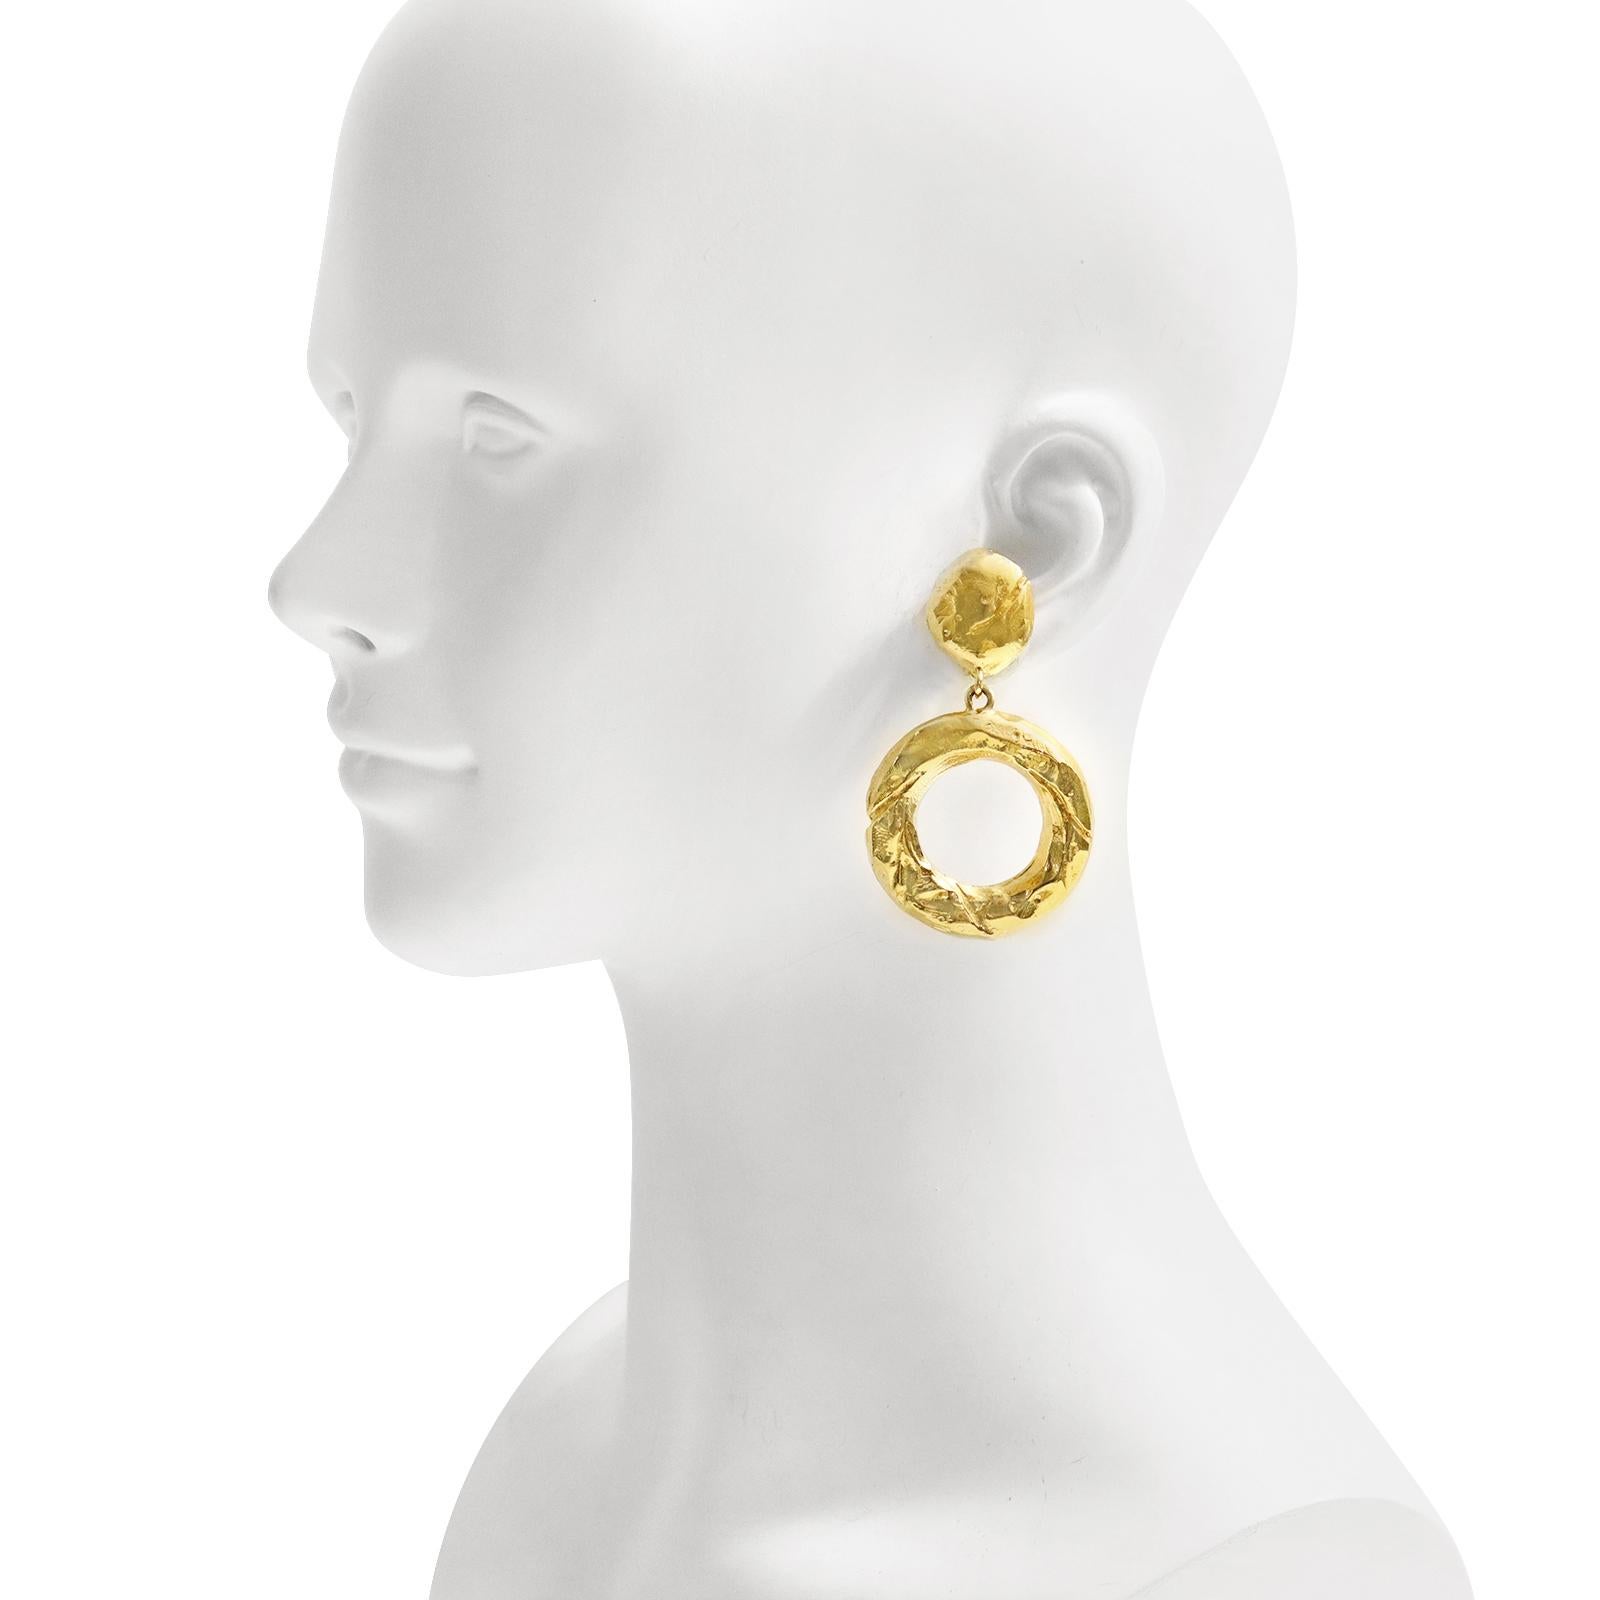 Vintage Givenchy Gold Tone Heavy Textured Front Facing Dangling Hoop Earrings.  Everyone needs a Classic Hoop like this in their wardrobe.  Spices up all your outfits. W. Clip on.

Now these are a great pair of dangling hoops!

If you remind me I